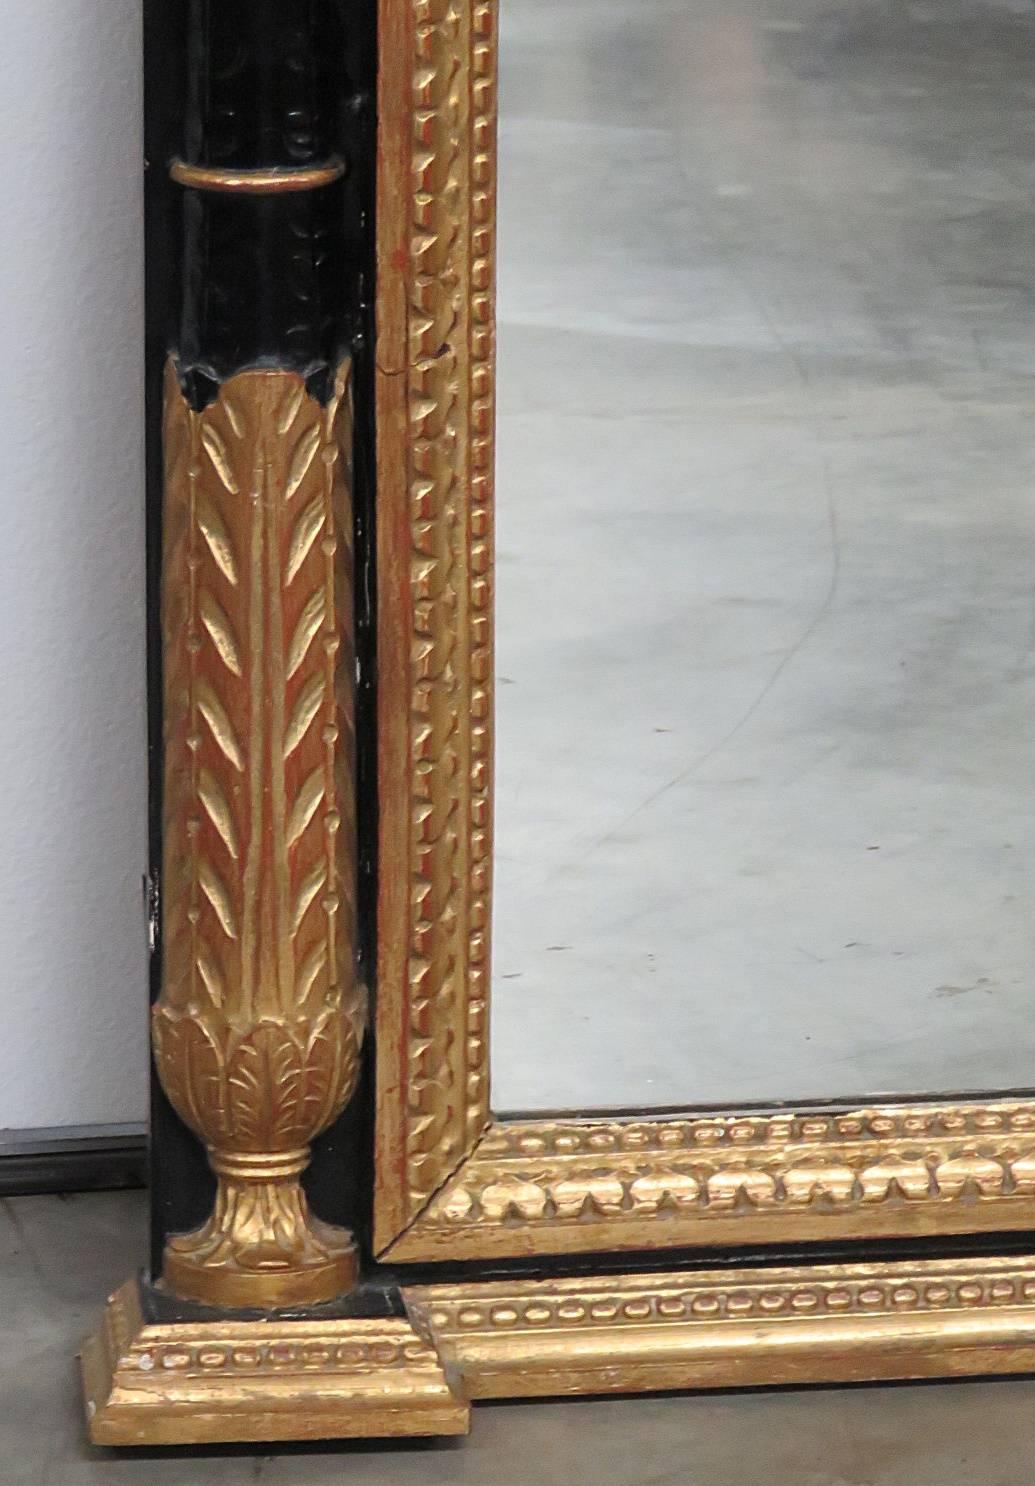 Italian Neoclassical style mirror with gilt accents.